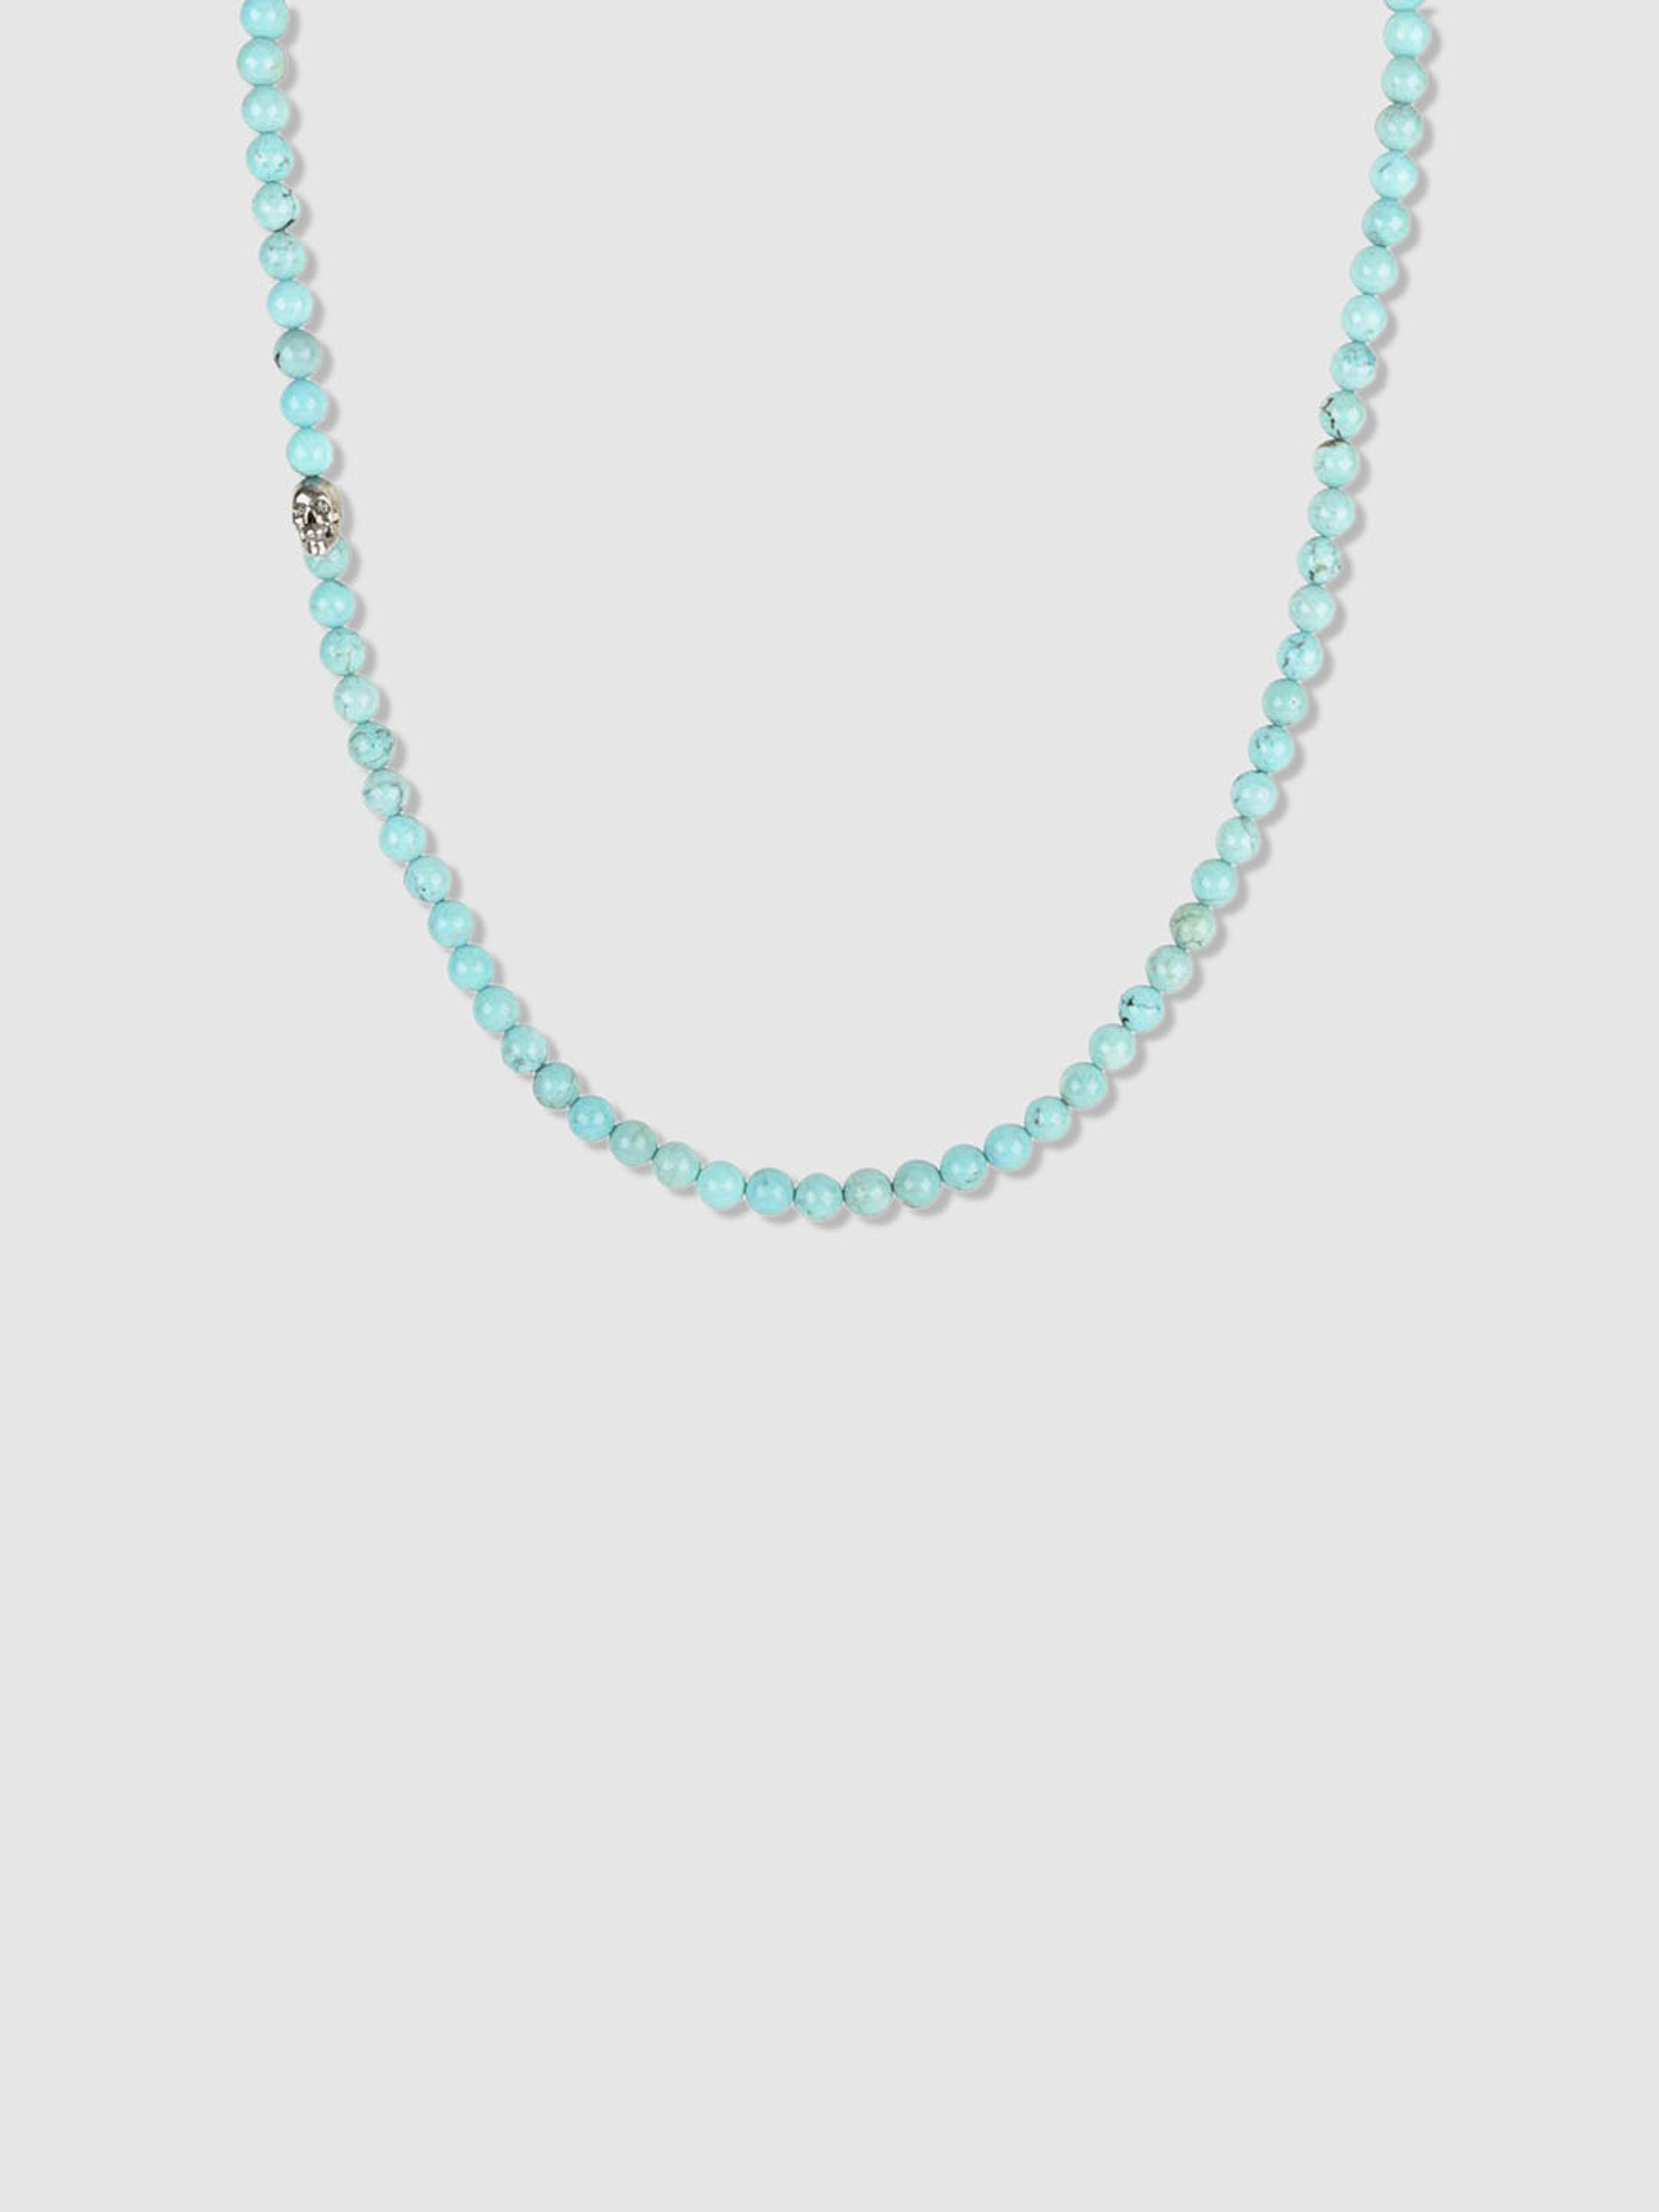 DEGS & SAL DEGS & SAL STERLING SILVER & TURQUOISE BEADED NECKLACE